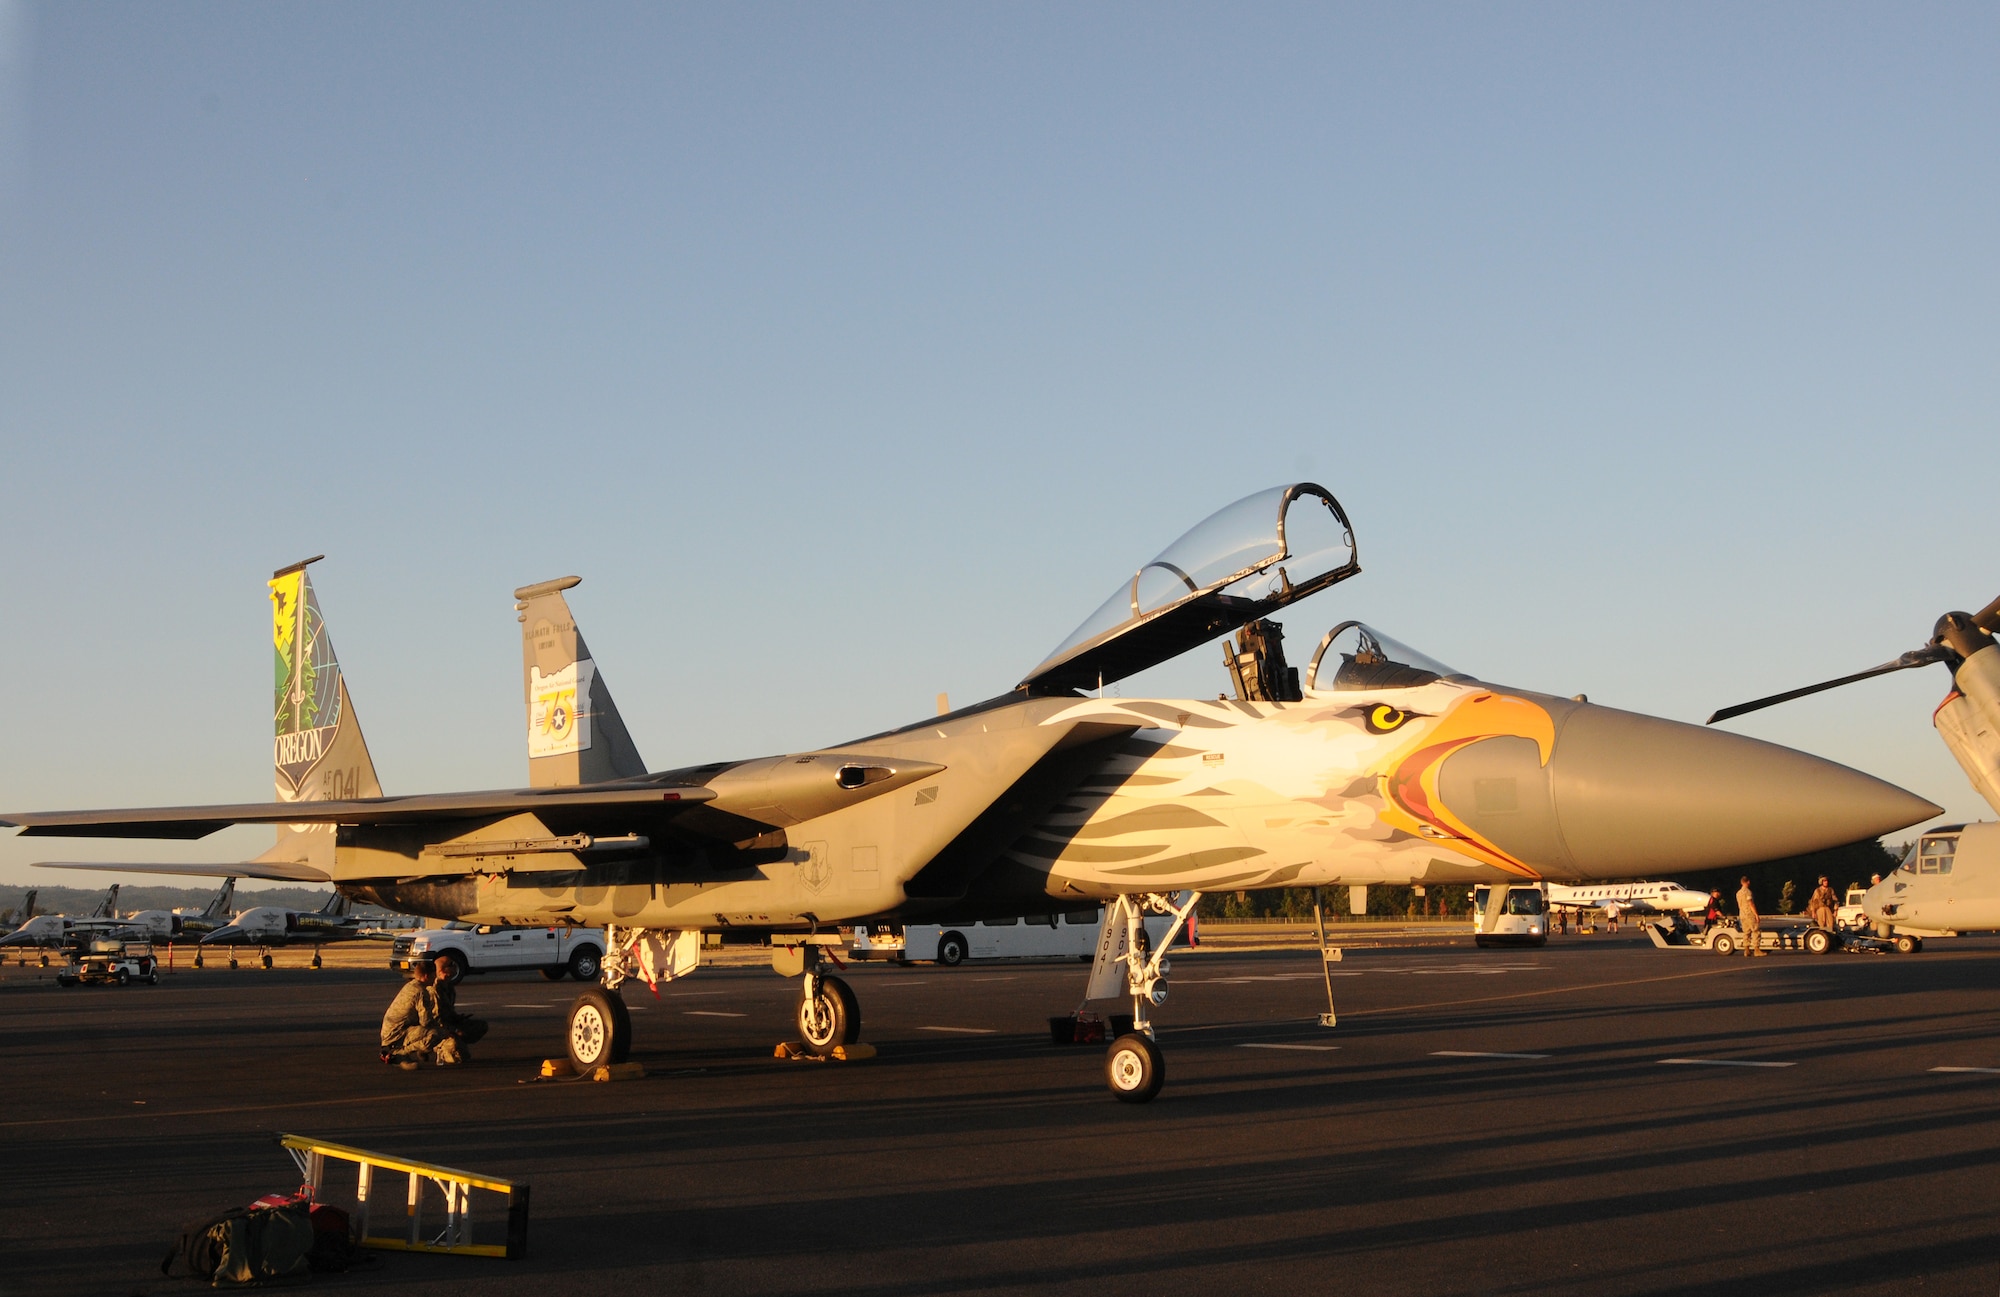 An Oregon Air National Guard F-15 Eagle assigned to the 173rd Fighter Wing is parked on the Hillsboro International Airport, Ore., flightline as part of the Oregon International Air Show, Aug. 5, 2016. The ‘Screaming Eagle’ paint designed is in recognition of the 75th Anniversary of the Oregon Air National Guard. (U.S. Air National Guard photo by Tech. Sgt. John Hughel, 142nd Fighter Wing Public Affairs/Released).